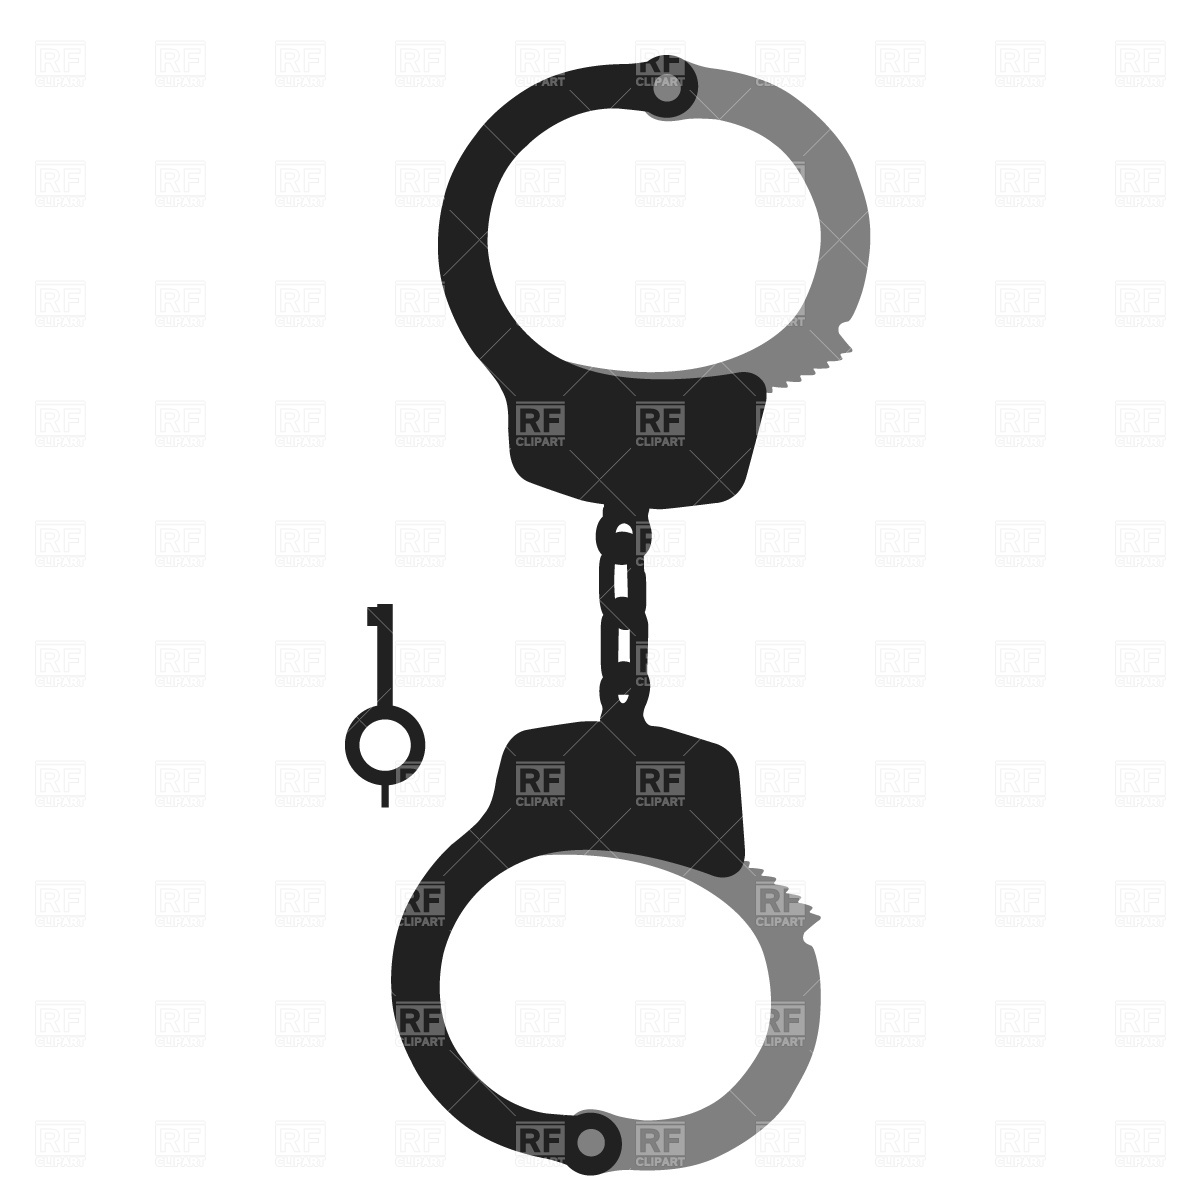 Handcuffs And Key 655 Objects Download Royalty Free Vector Clipart